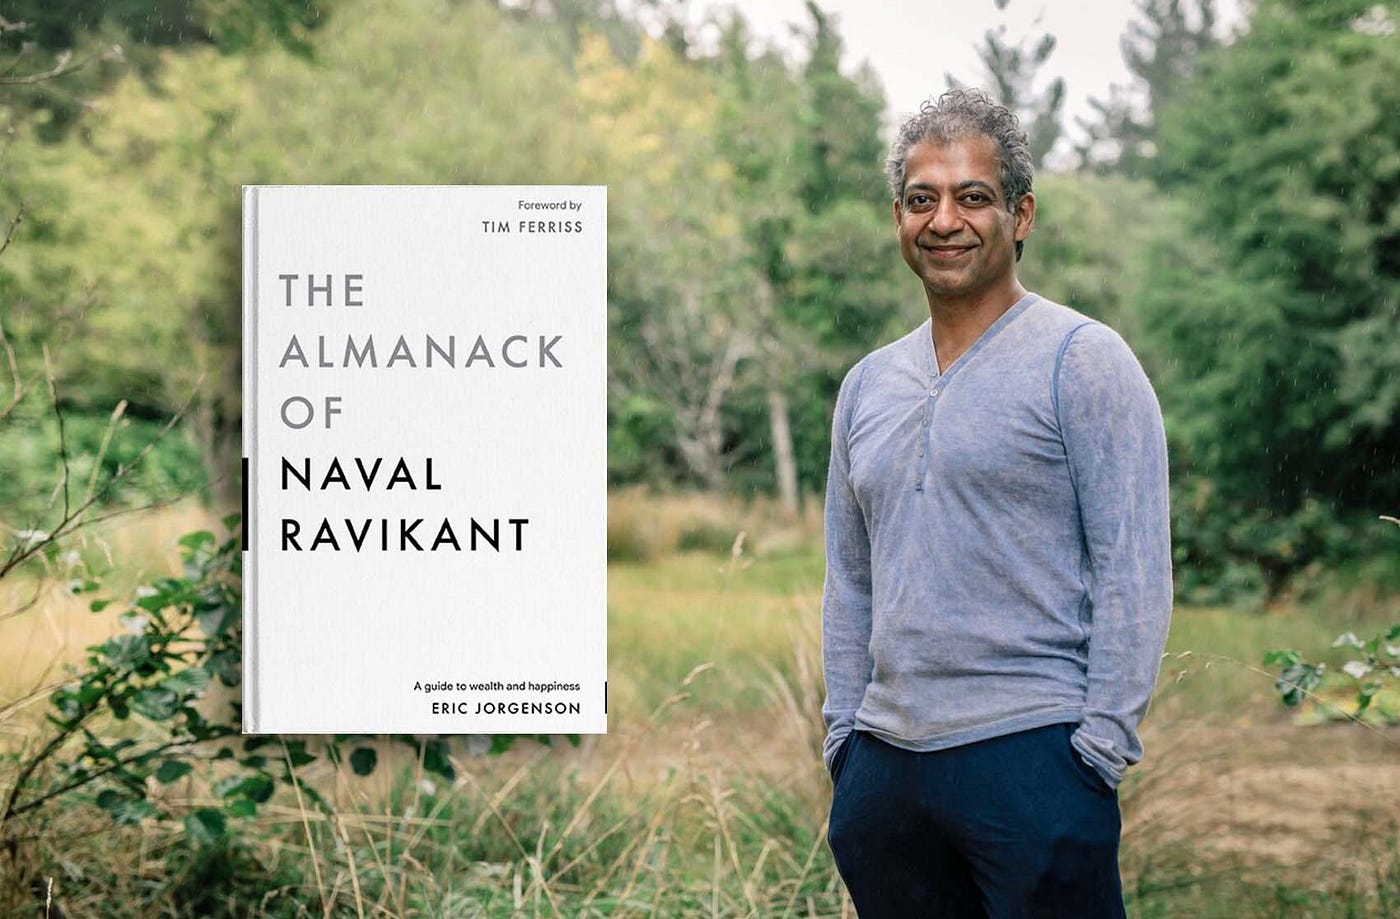 The Almanack of Naval Ravikant. Getting rich is not just about luck…, by  Terrance McArthur